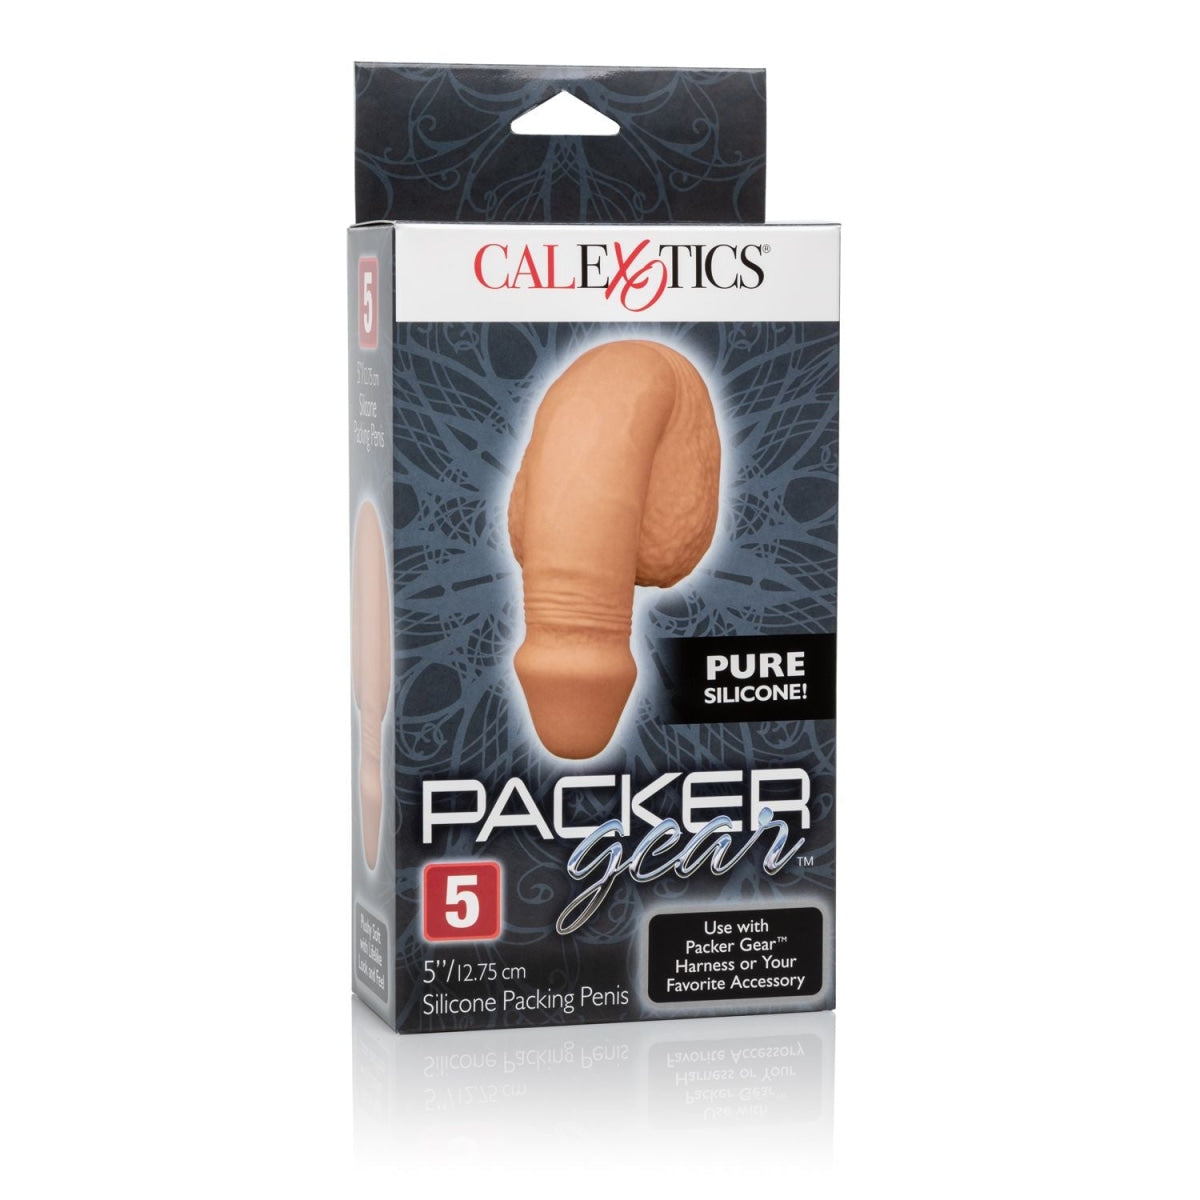 Packer Gear 5in Silicone Penis Tan Intimates Adult Boutique